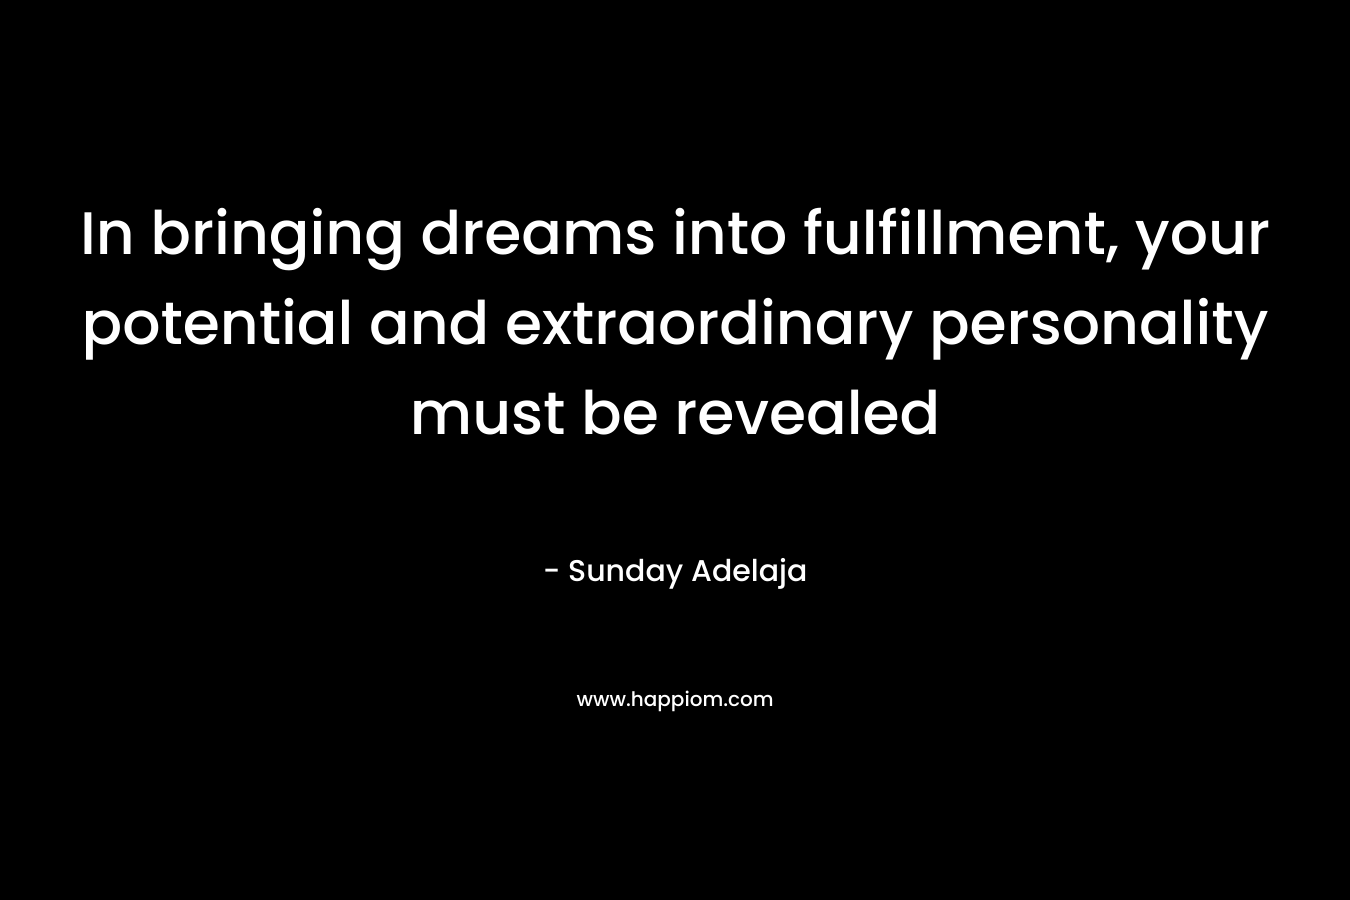 In bringing dreams into fulfillment, your potential and extraordinary personality must be revealed